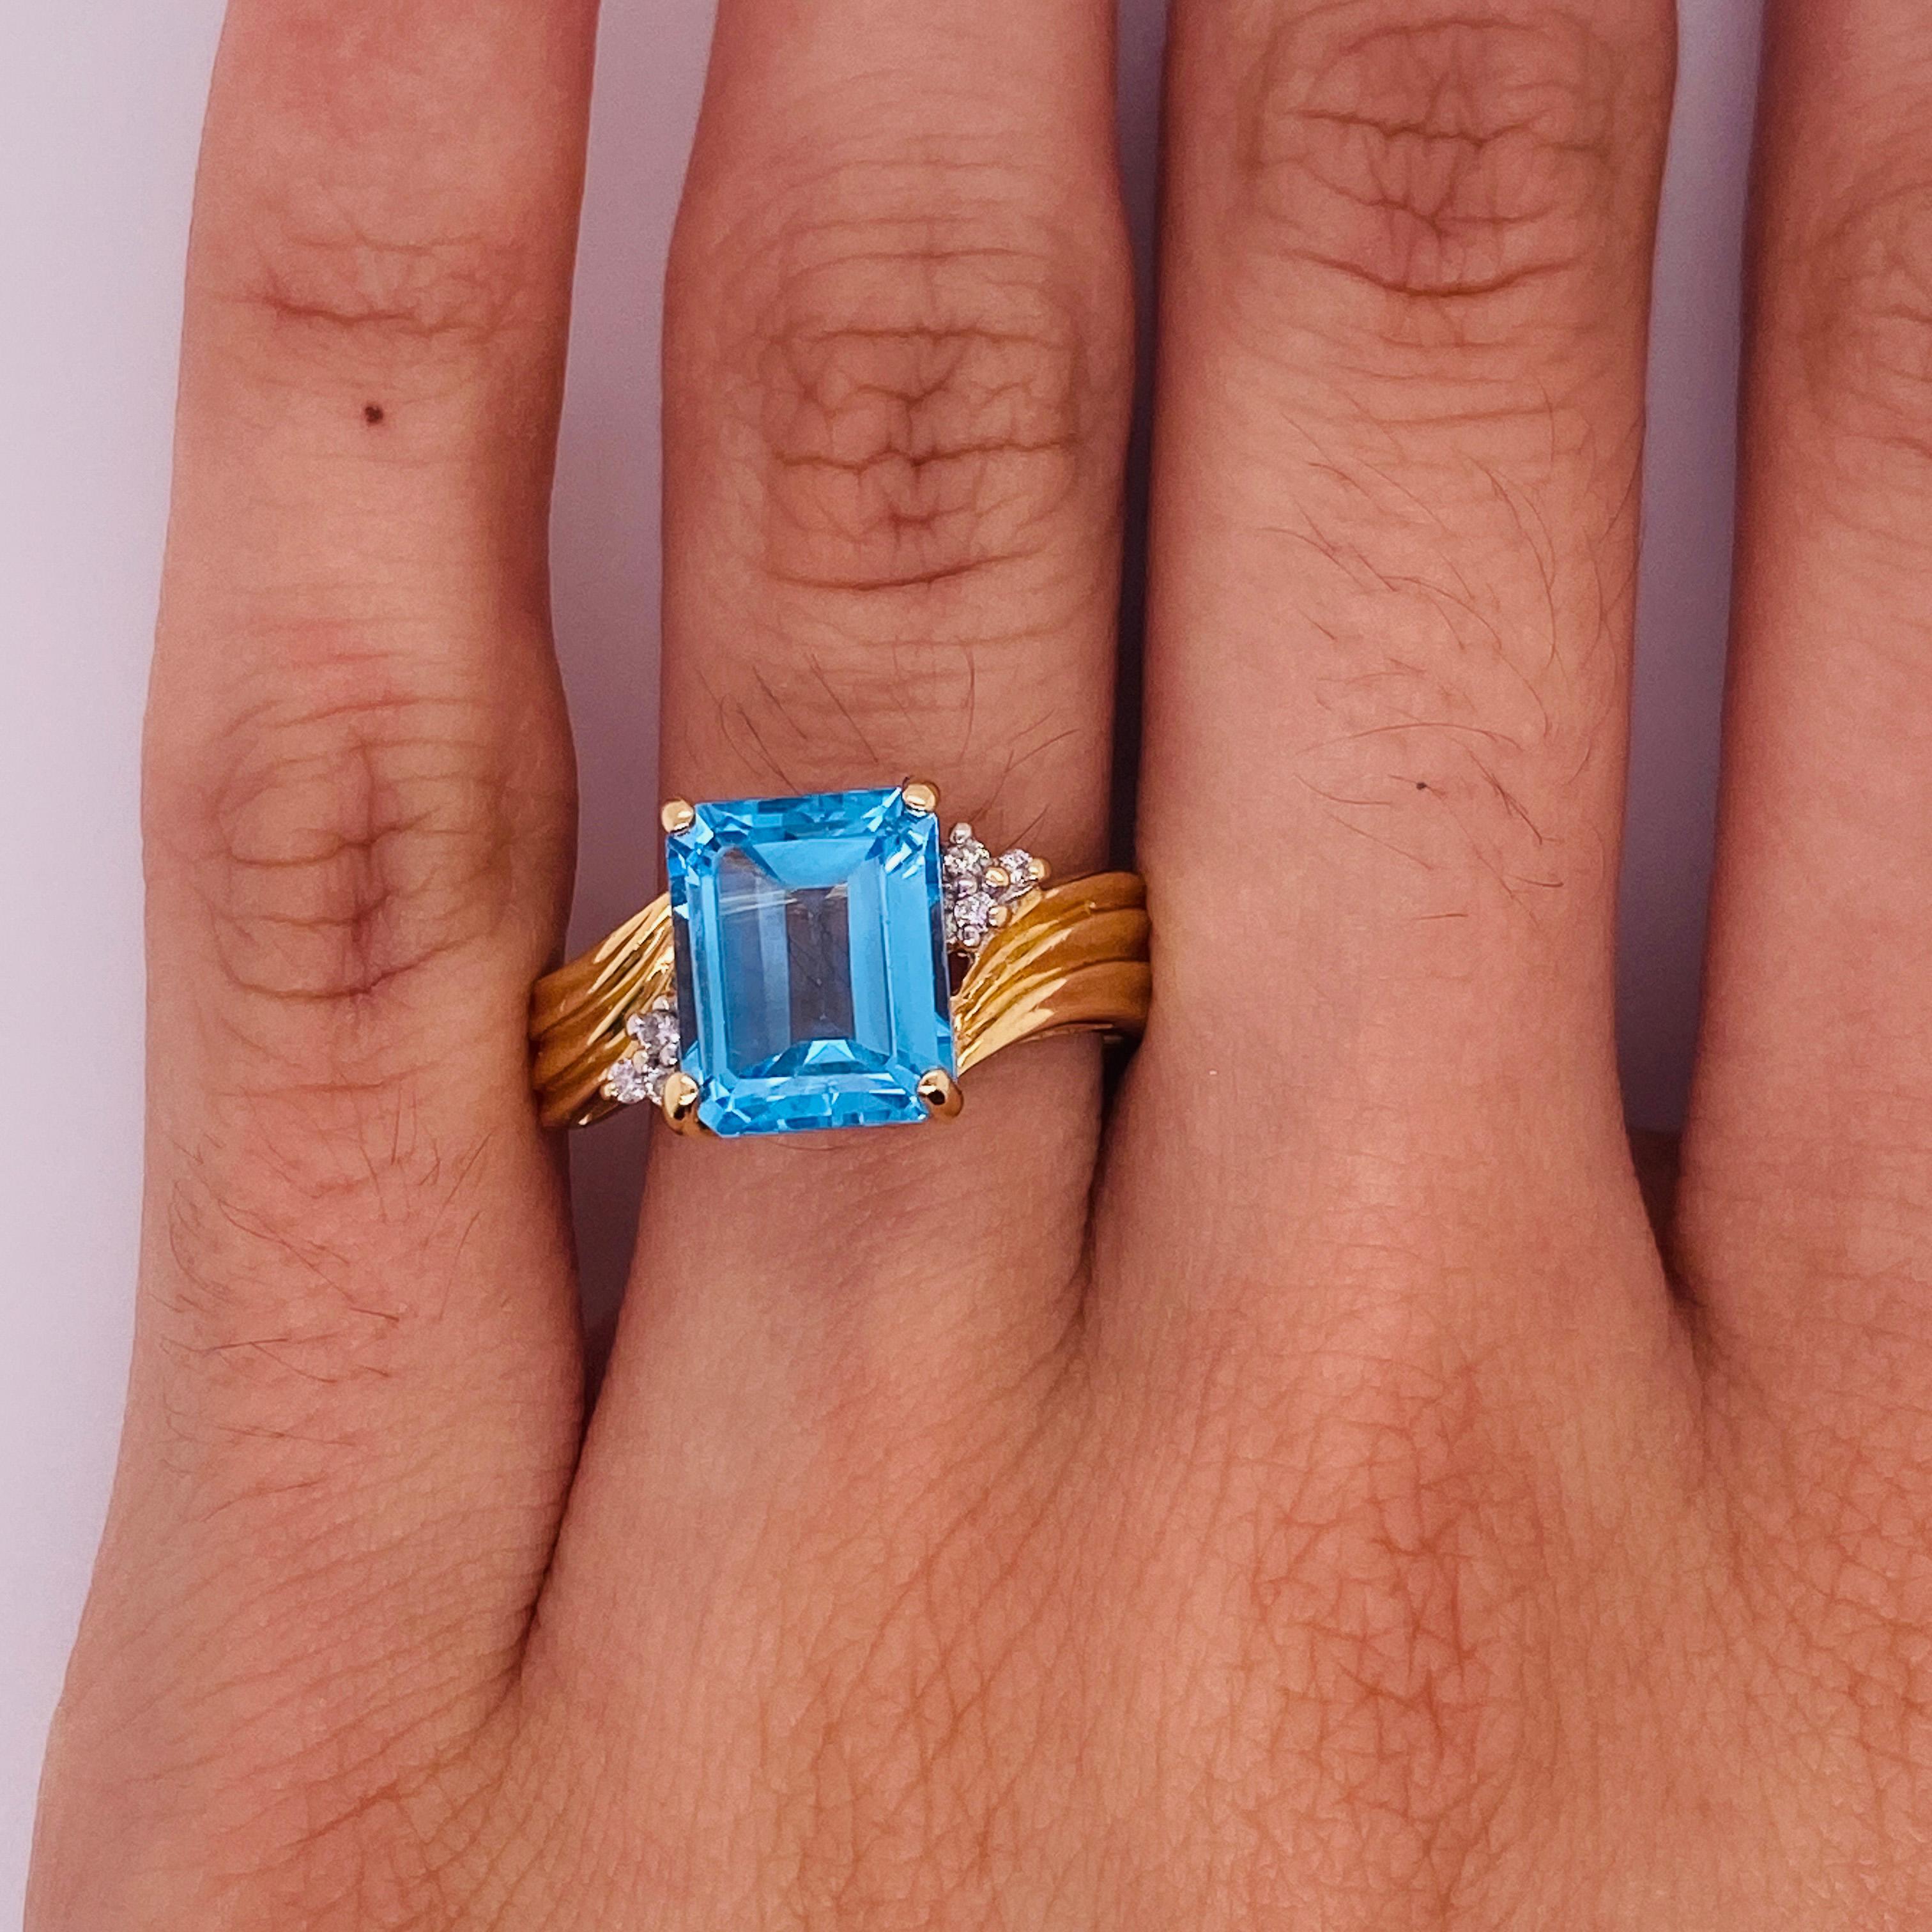 Celebrate a December loved one with this beautiful birthstone ring that holds a perfect harmony of bold straight lines and sweeping curves. This ring shines brightest on the hand! The blue topaz is the blue of a vibrant ocean with the curving